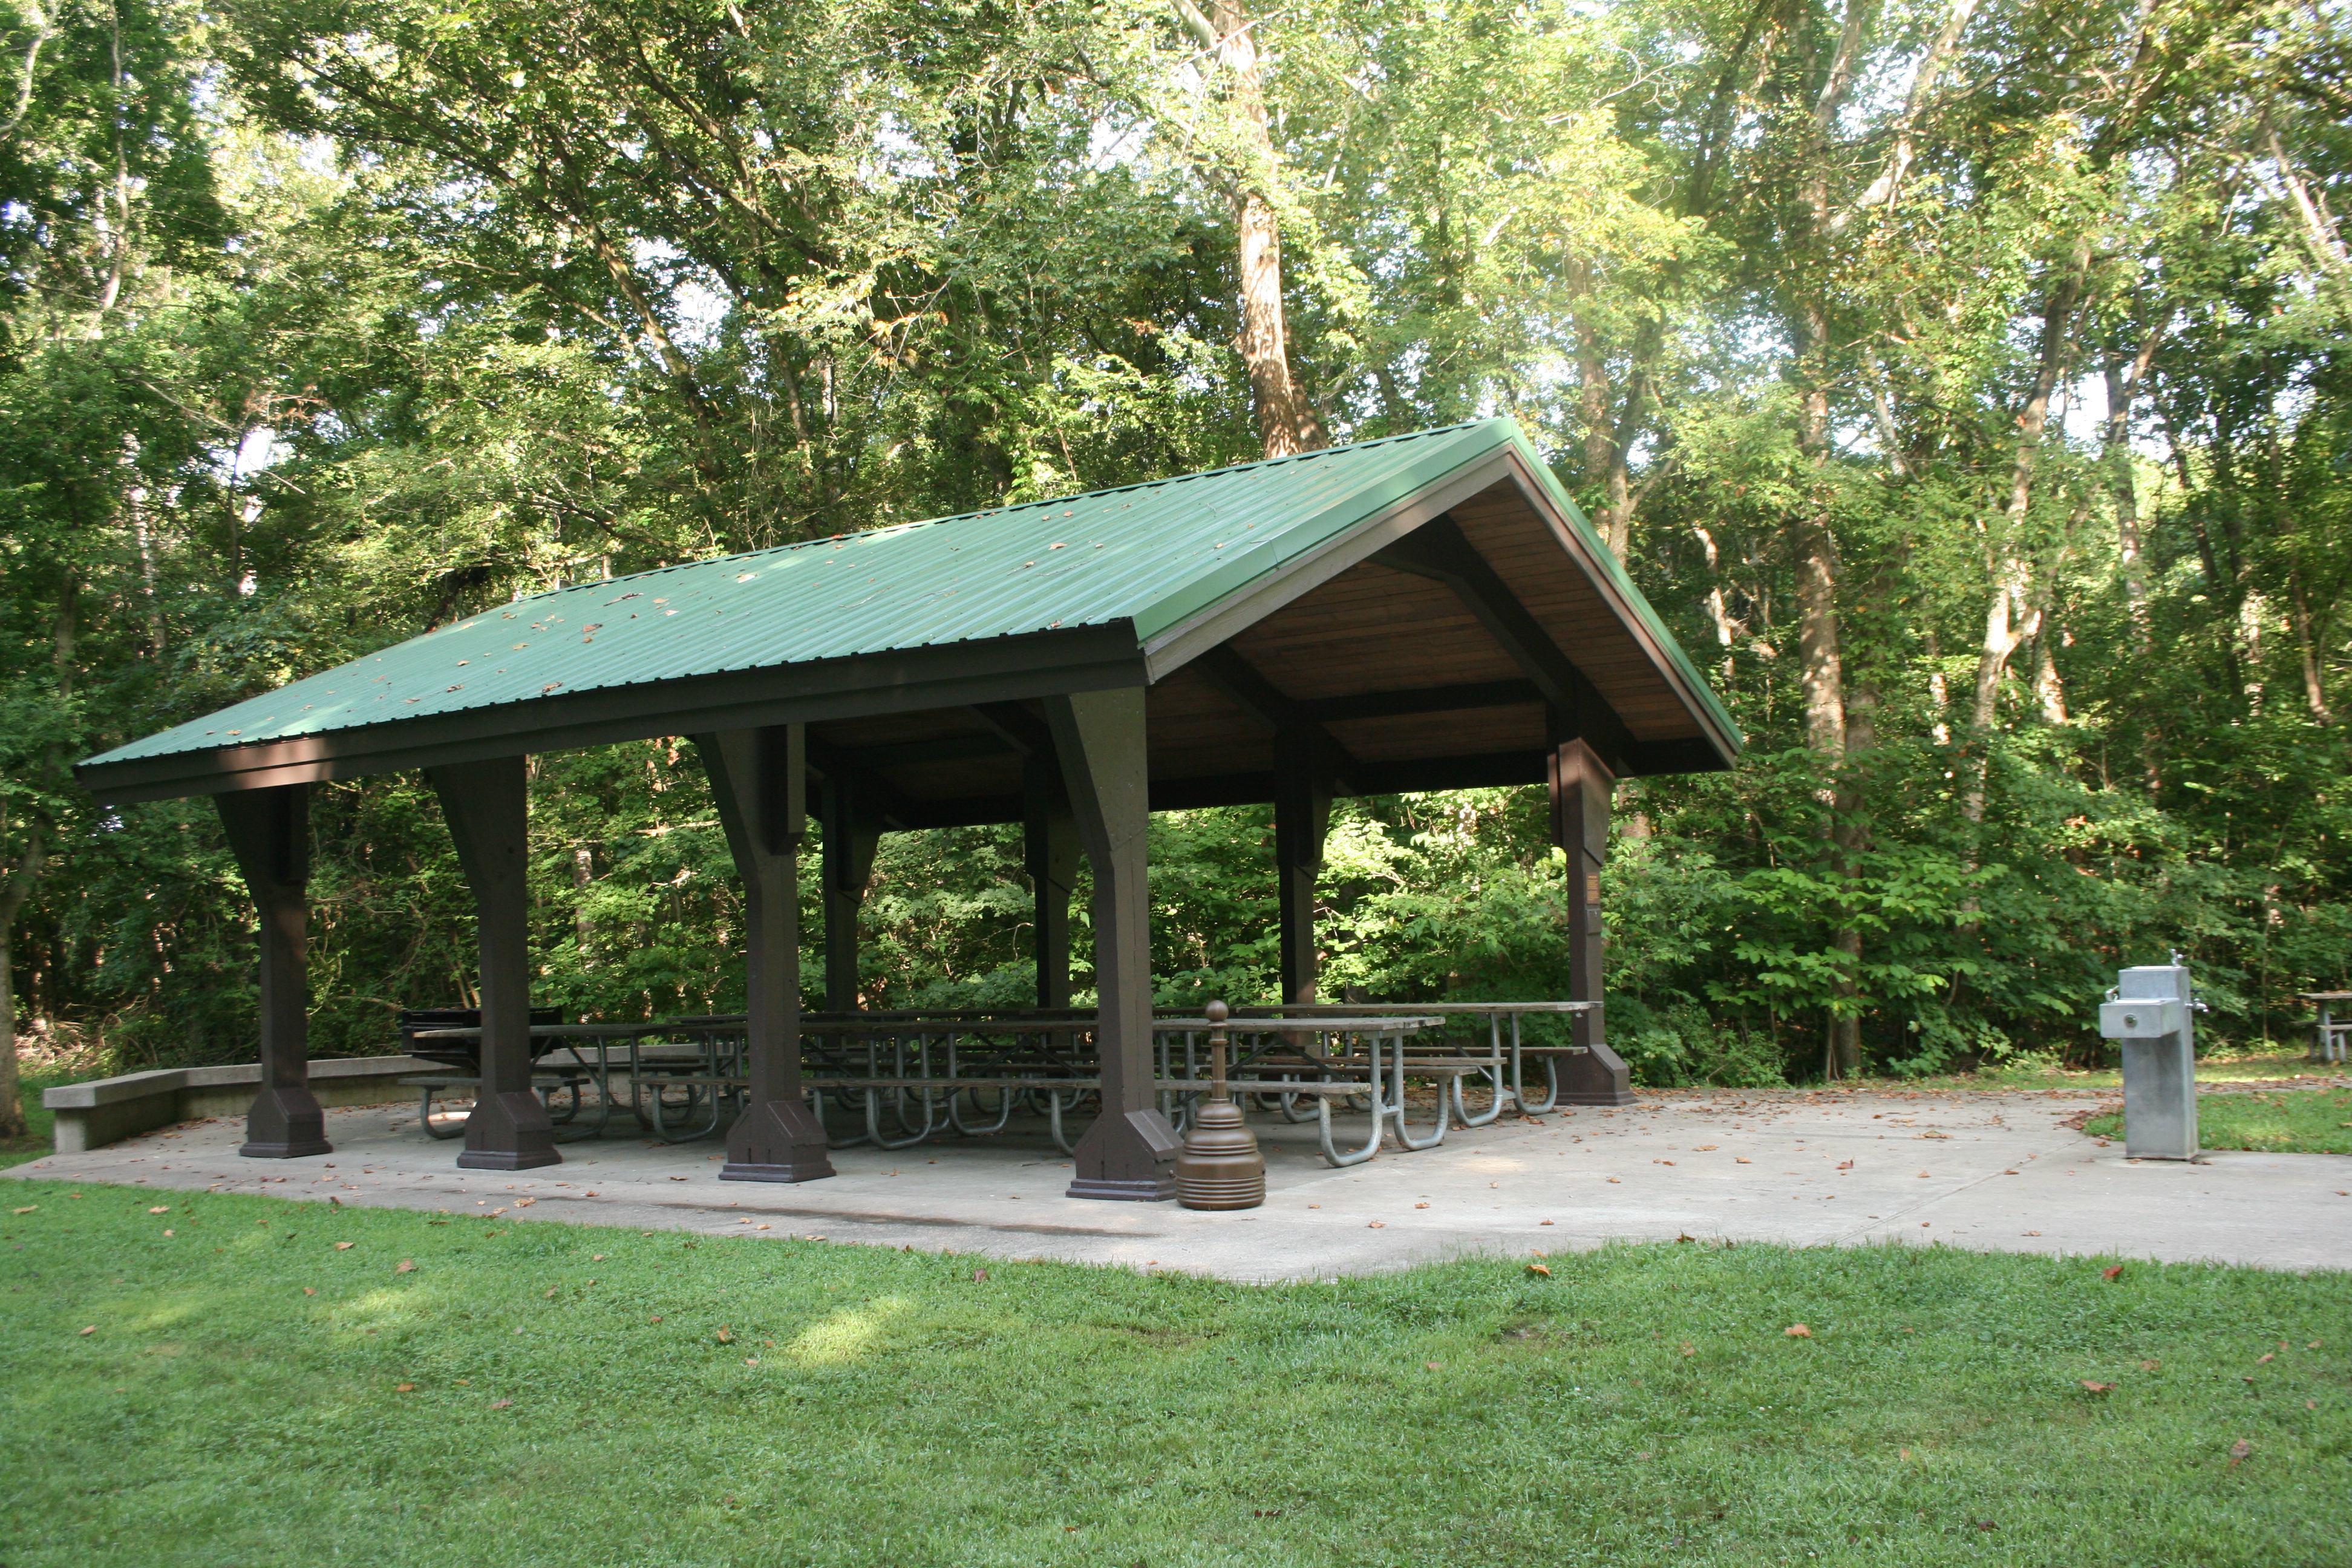 Side and front view of open pavilion-style shelter and nearby water fountain